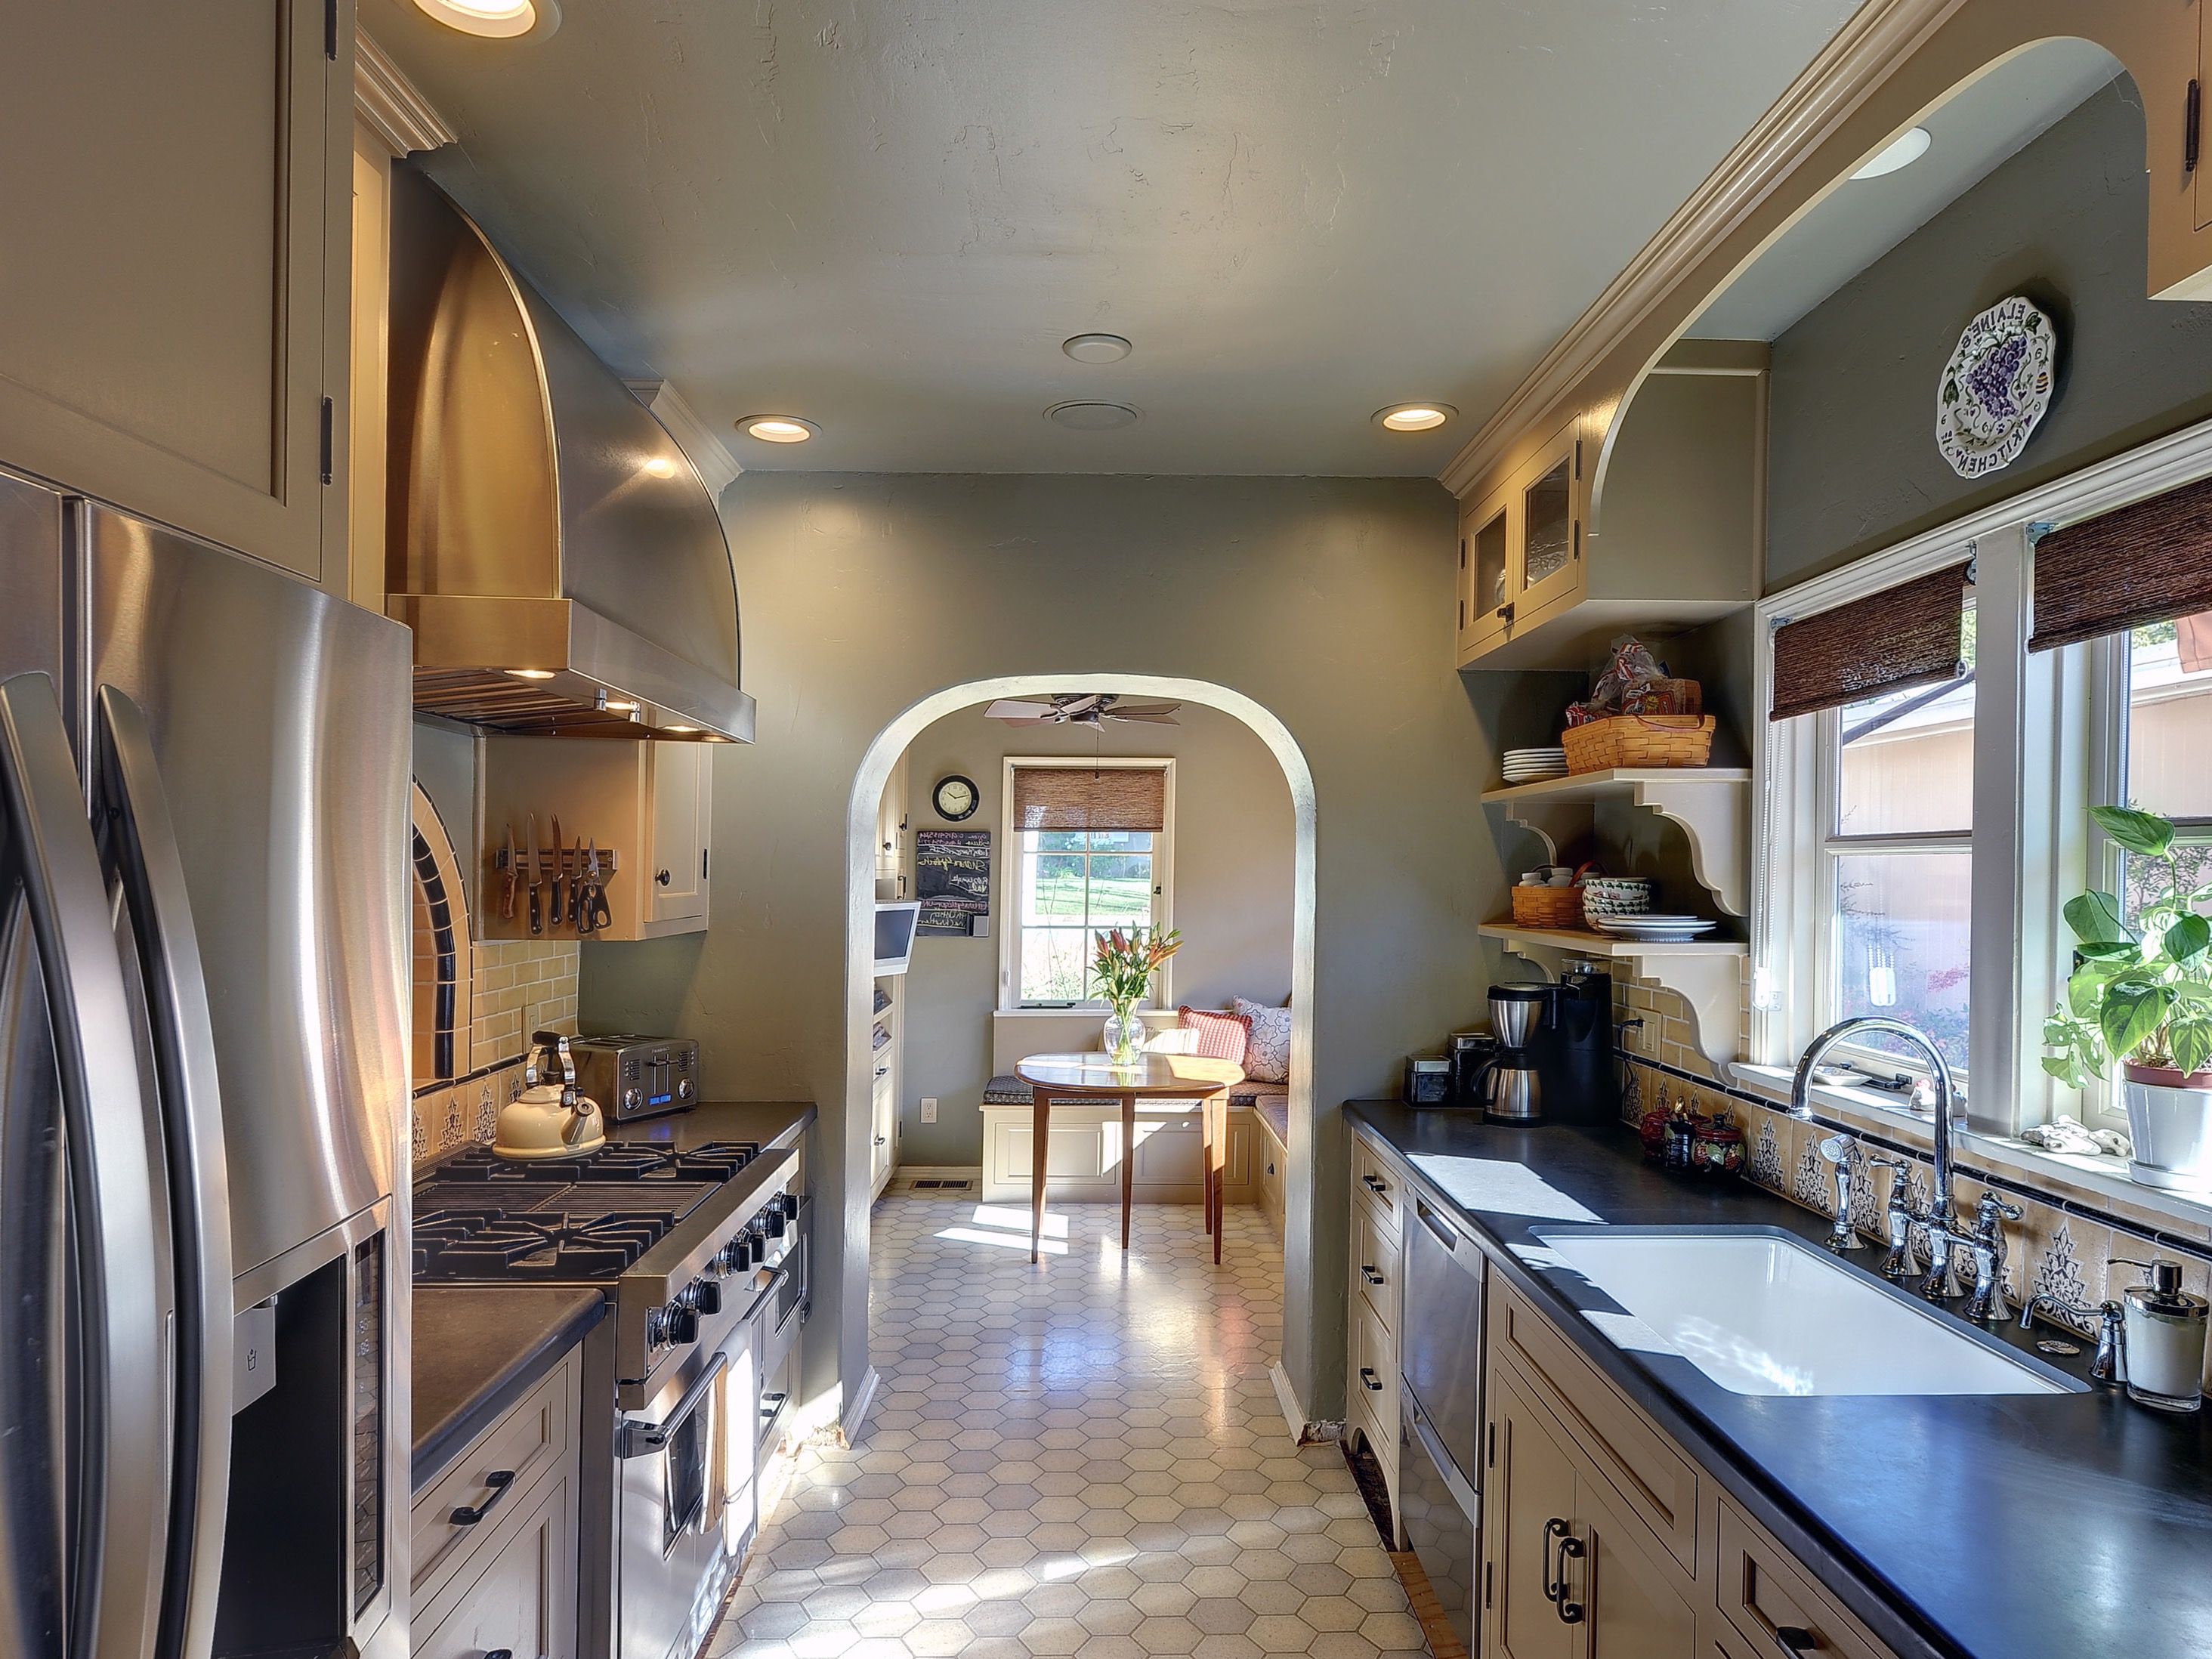 Classic Long And Narrow Mediterranean Kitchen Design (View 3 of 10)